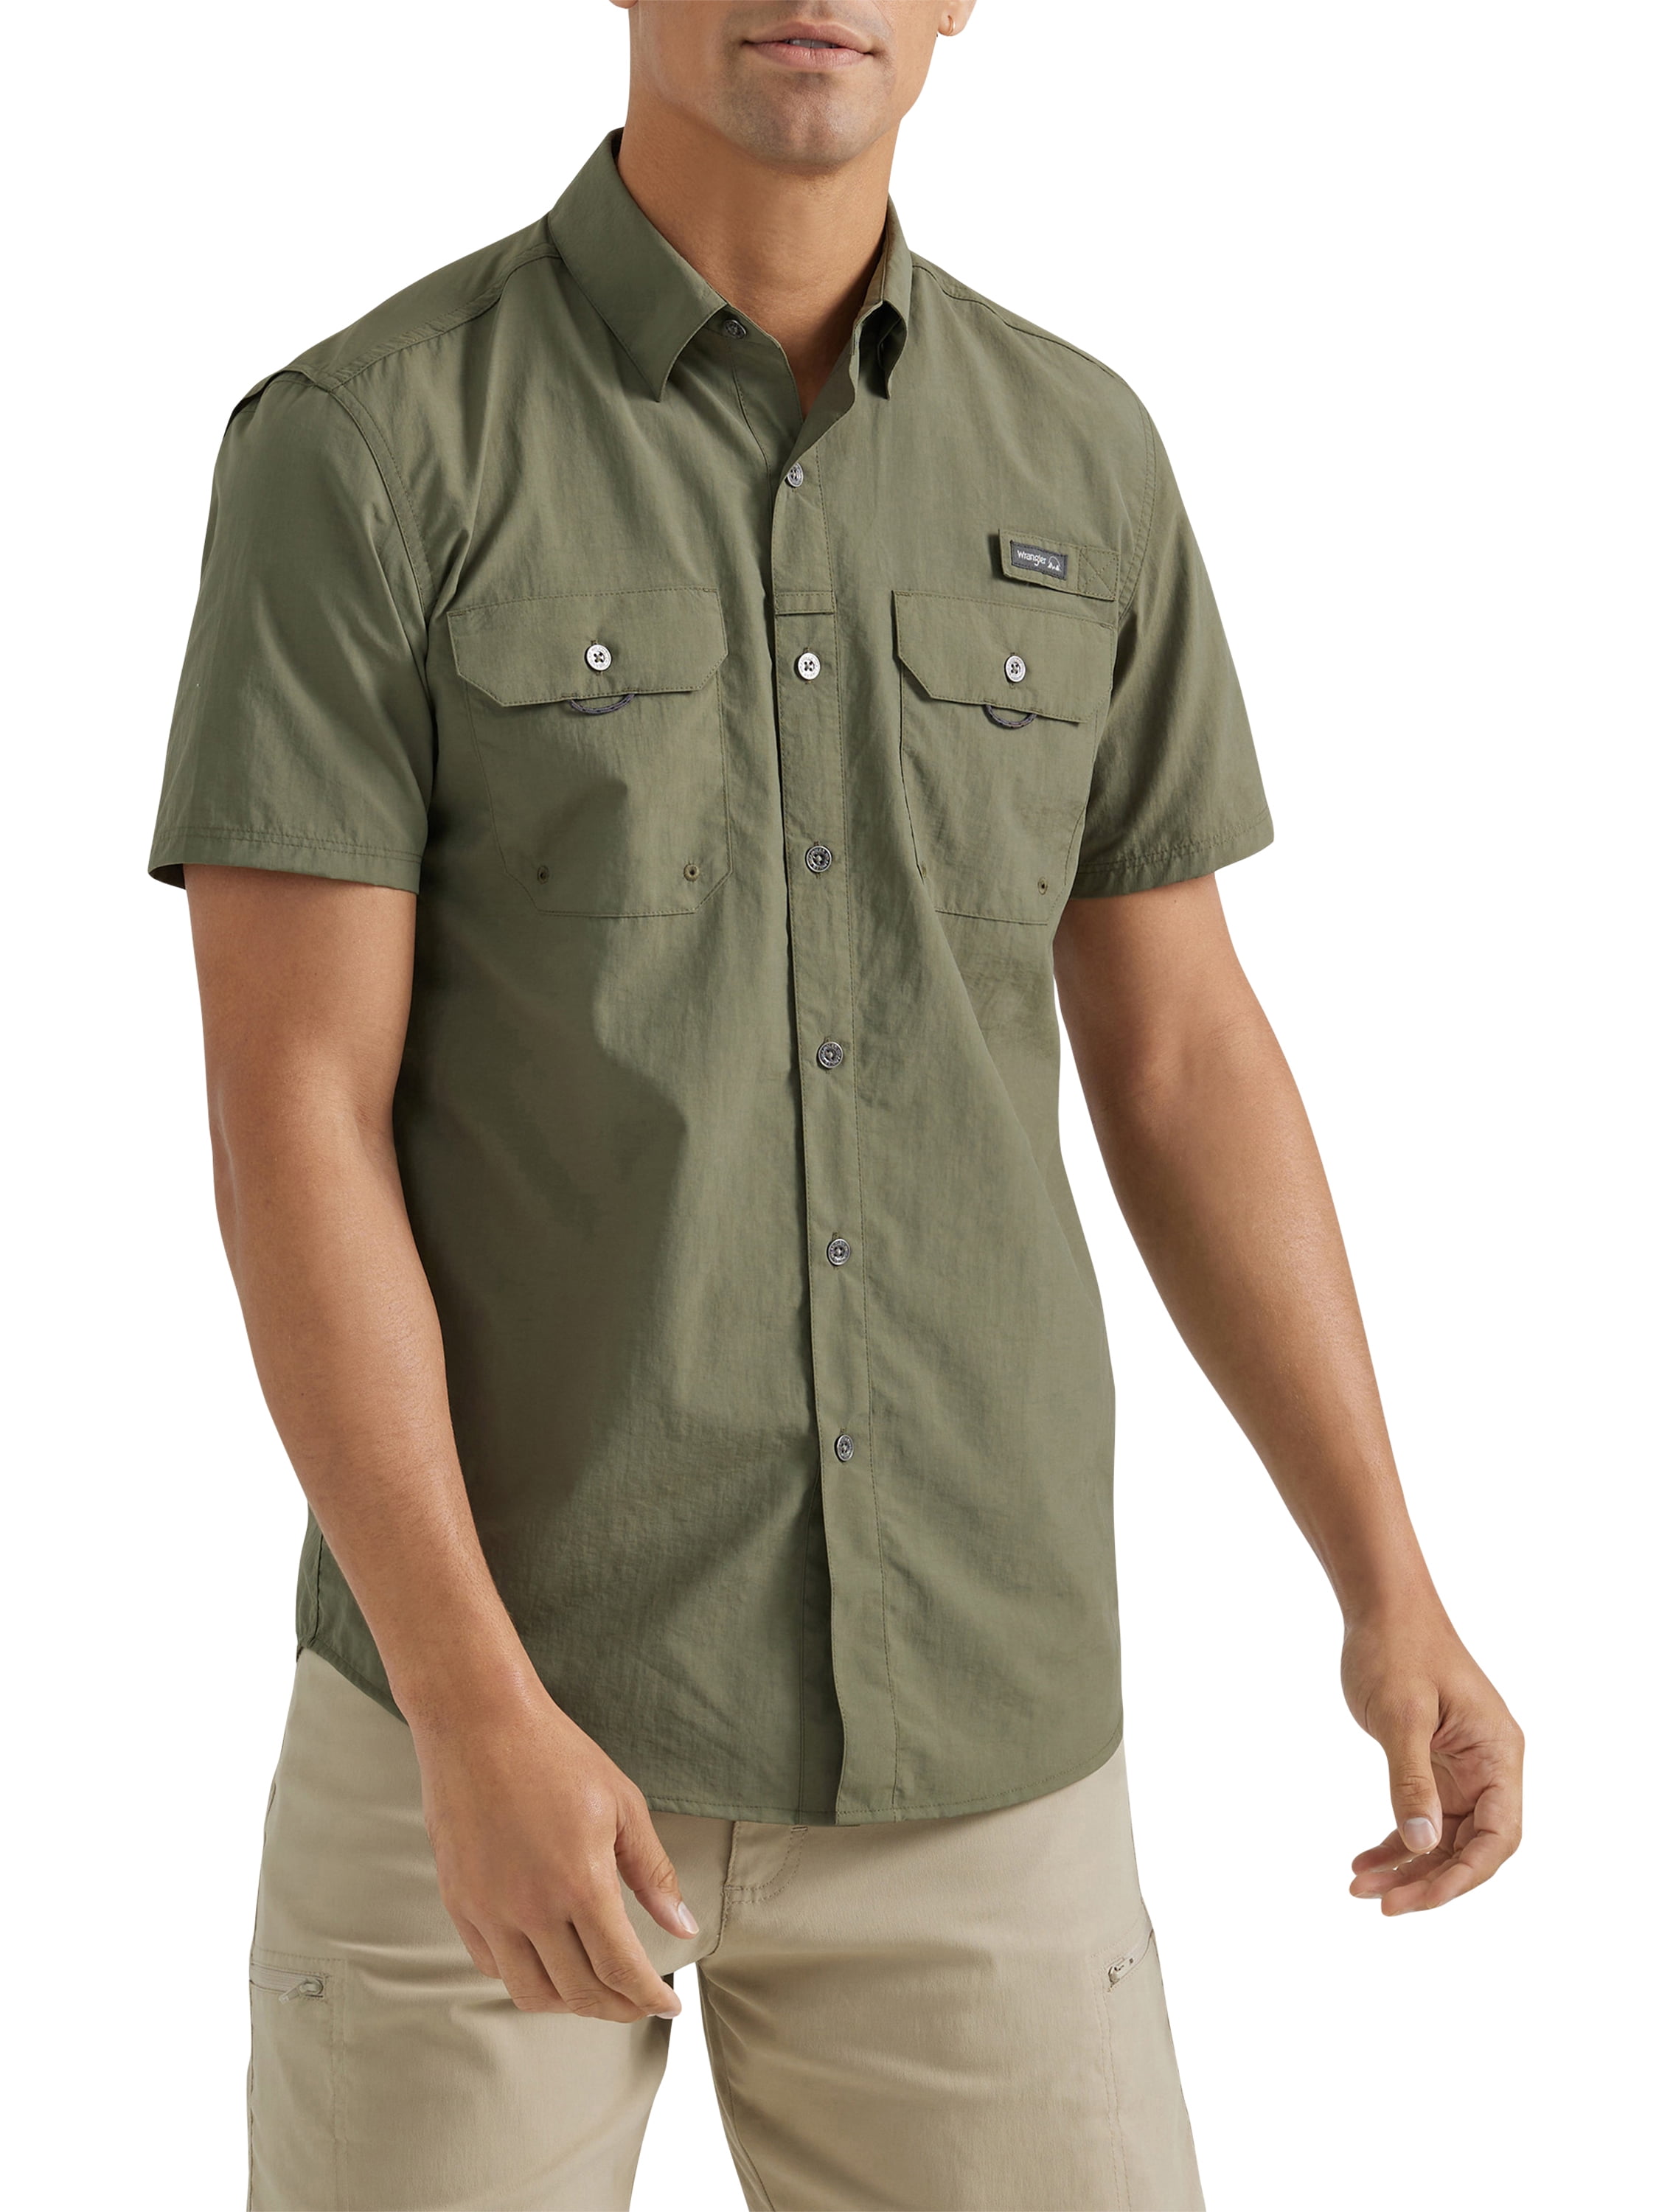 Wrangler Men's Outdoor Short Sleeve Fishing Shirt with UPF 40 Protection, Sizes S-5xl, Size: 3XL, Green